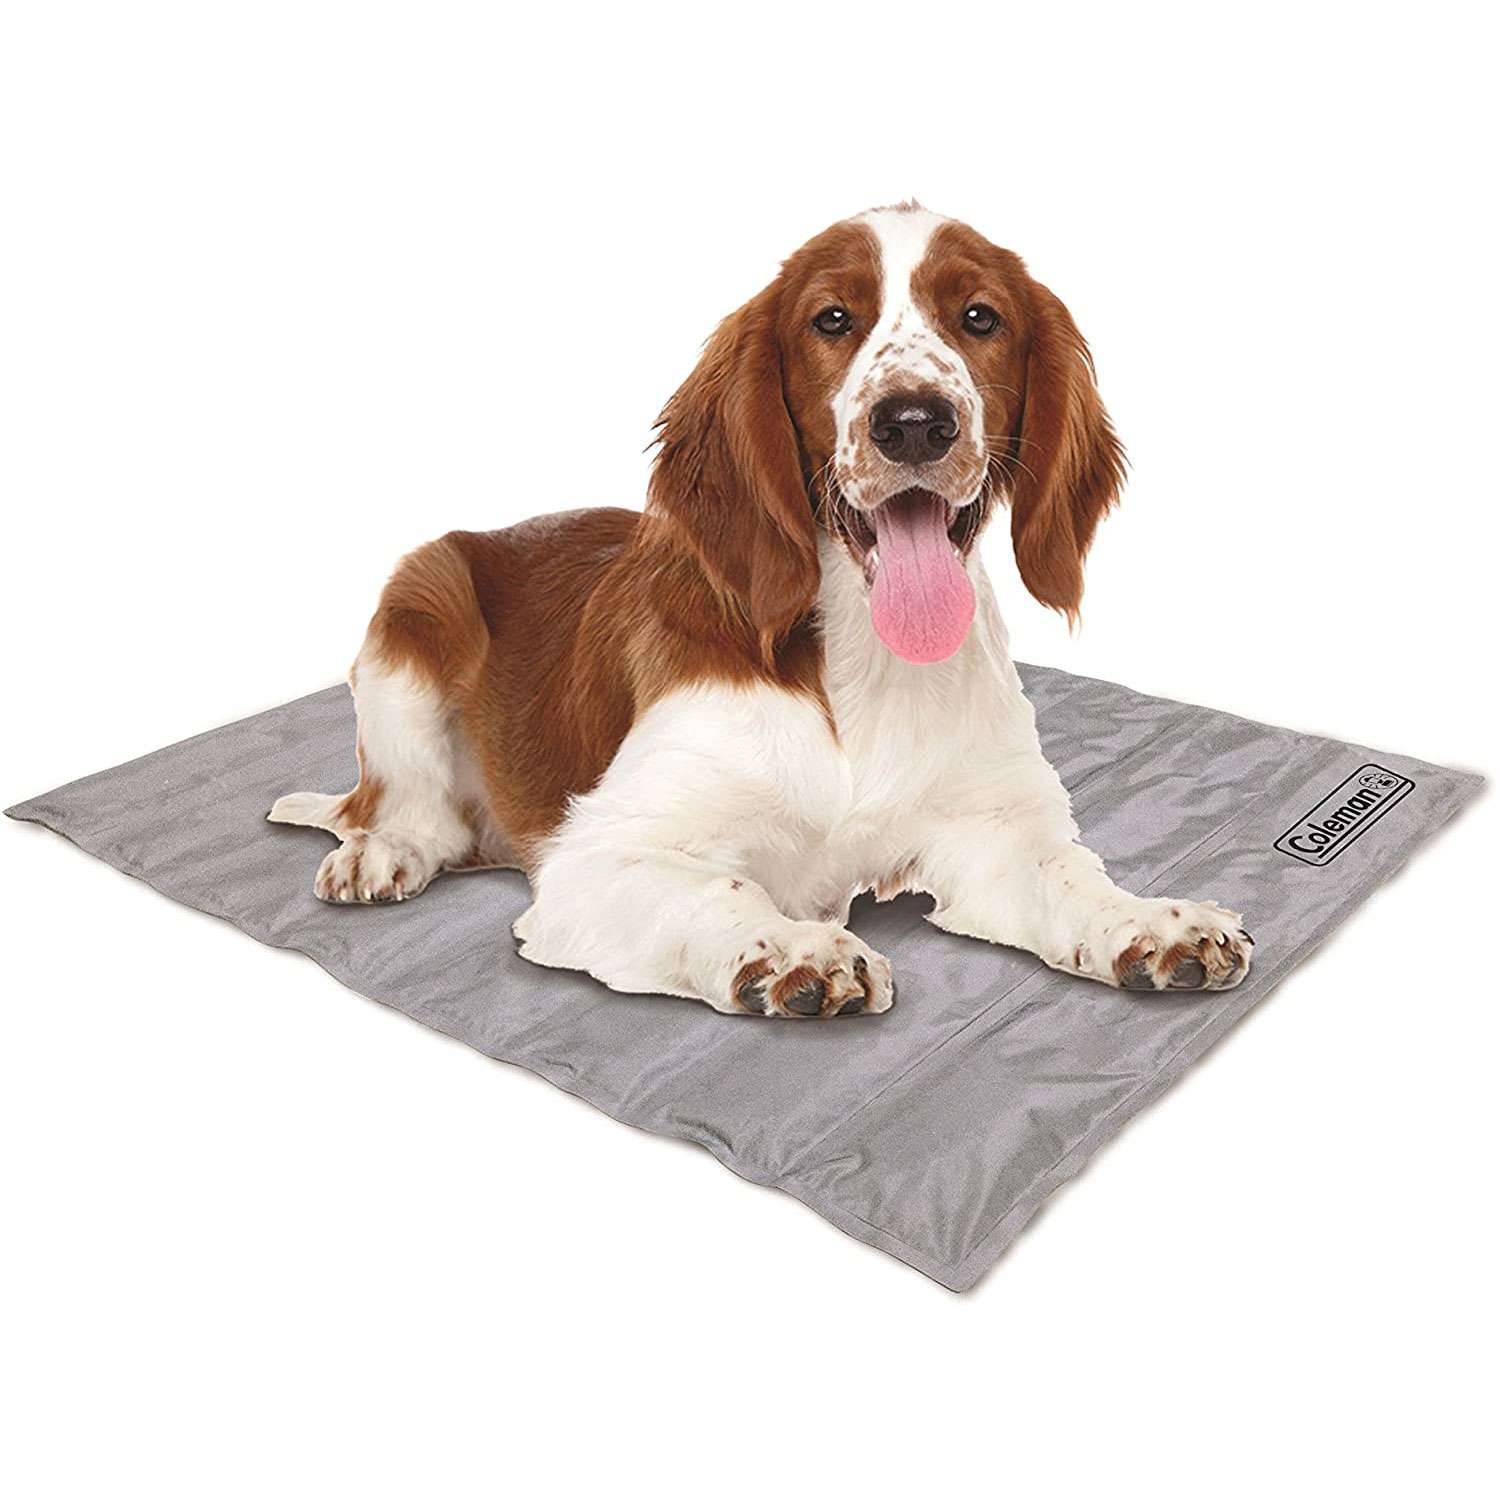 Summer Pet Sleeping Mat Dog Cool Pad Cover for Puppy Kennel Sofa Floor Non Sticking Hair & Anti-slip Bottom & Bite Scratching Resistant Delicate Durable Sponge Stuffed Soft Touch Ice Vine